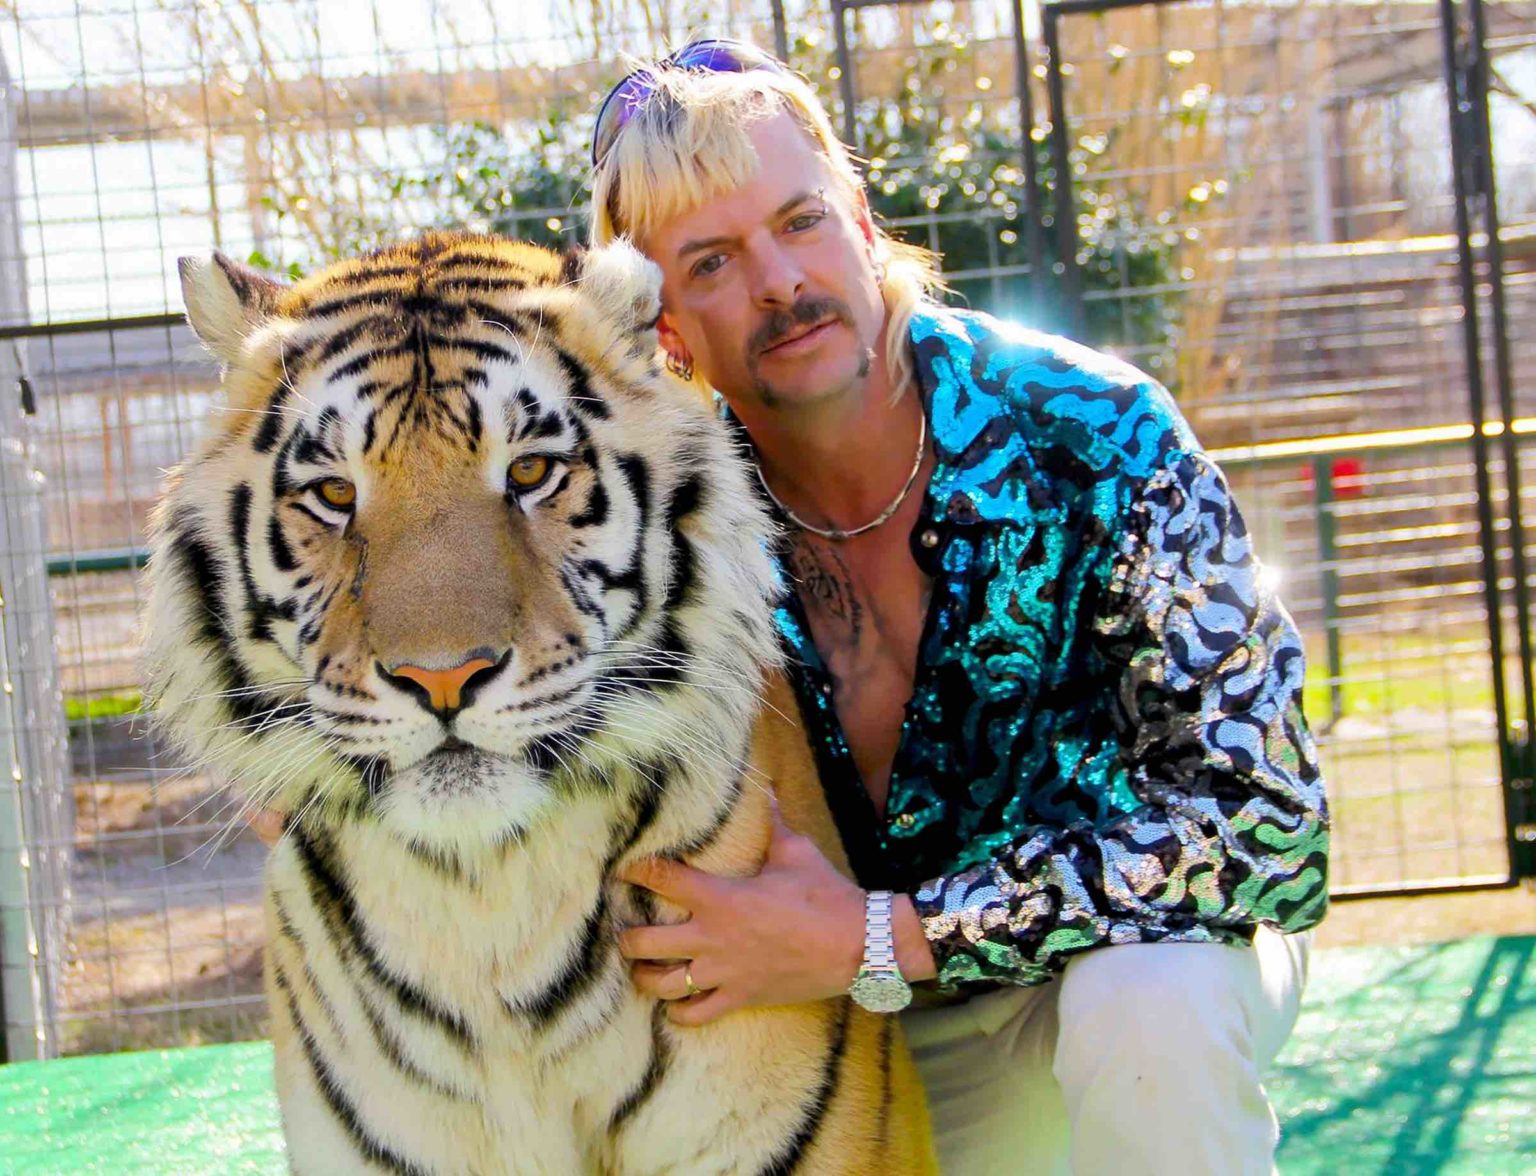 Netflix’s 'Tiger King' is going into the story of Joe Exotic’s claim to fame and his rise and fall. Here's everything we know about 'Tiger King'.